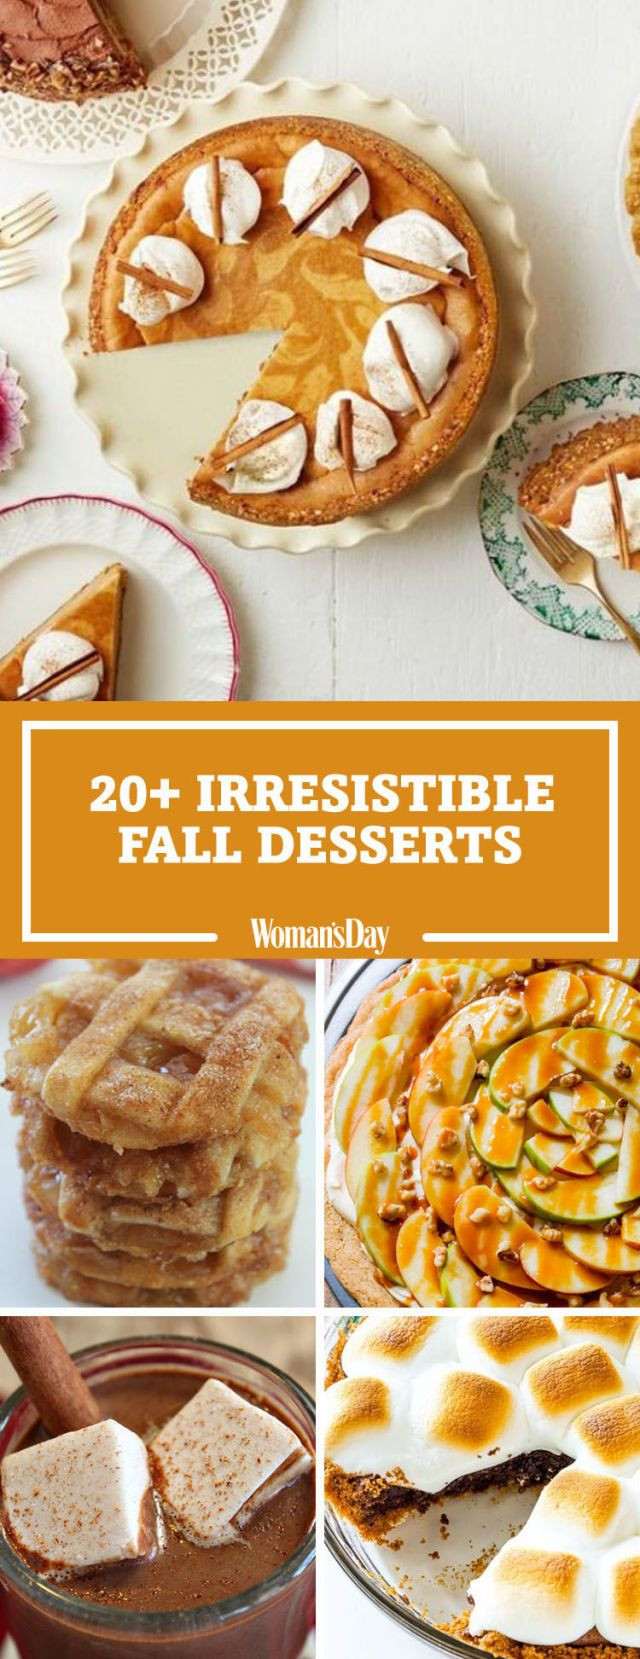 Best Fall Desserts
 31 Easy Fall Desserts Best Recipes for Autumn Desserts